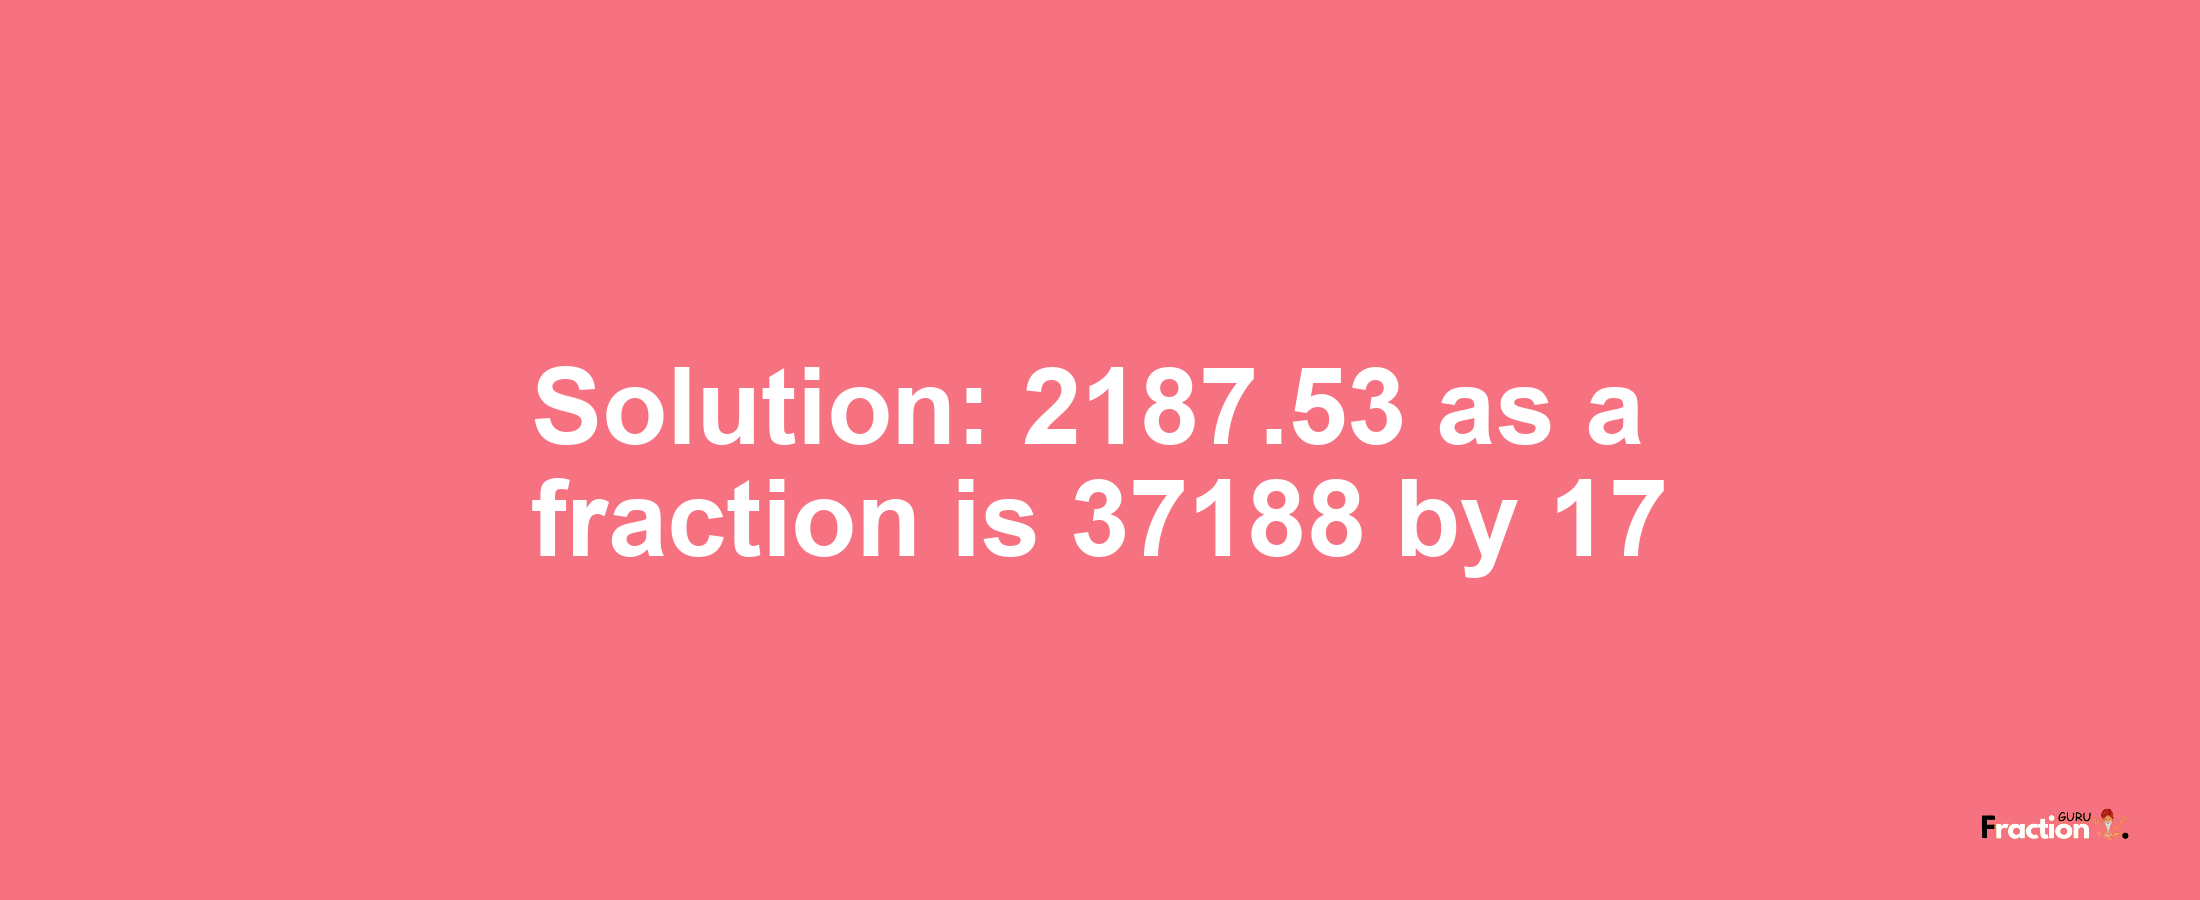 Solution:2187.53 as a fraction is 37188/17